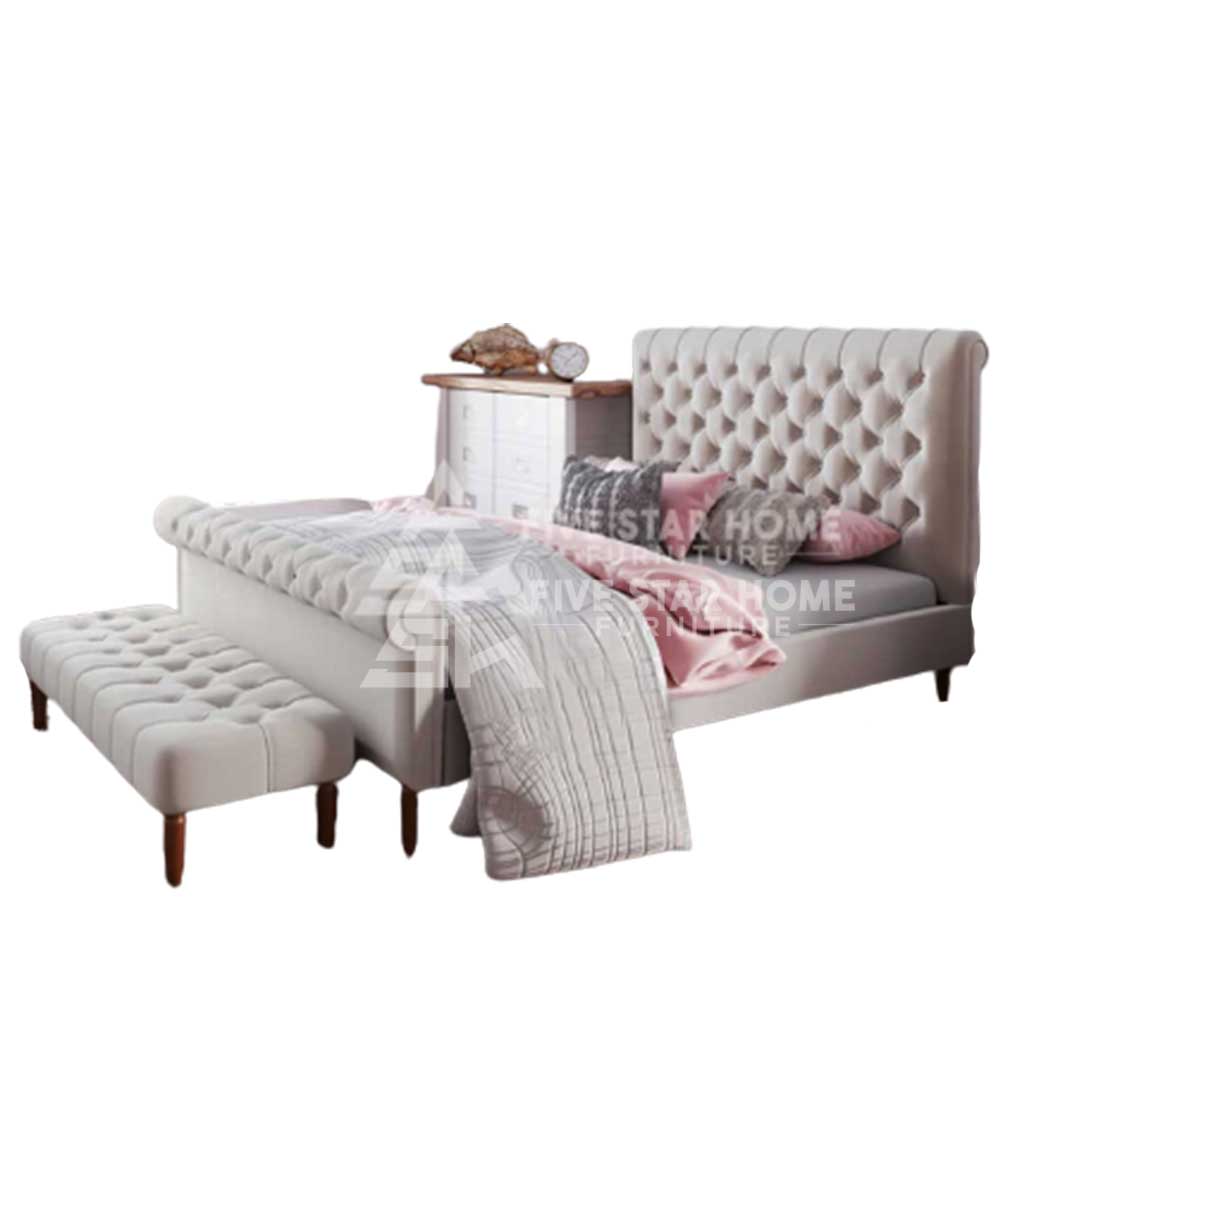 Fsh Chesterfield Sleigh Bed